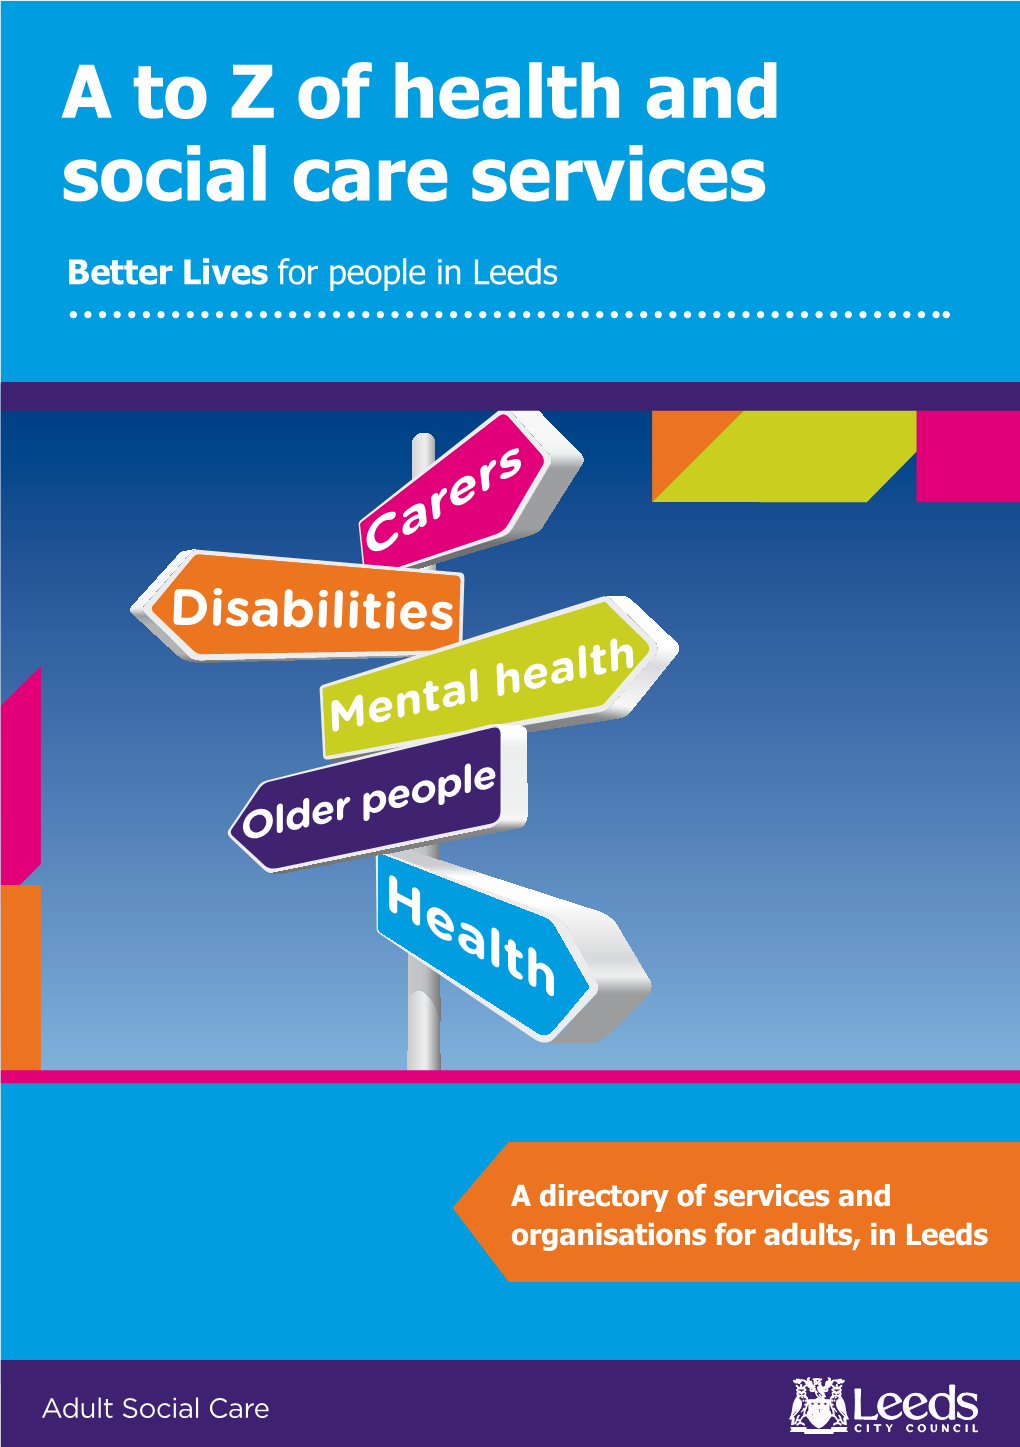 A to Z of Health and Social Care Services